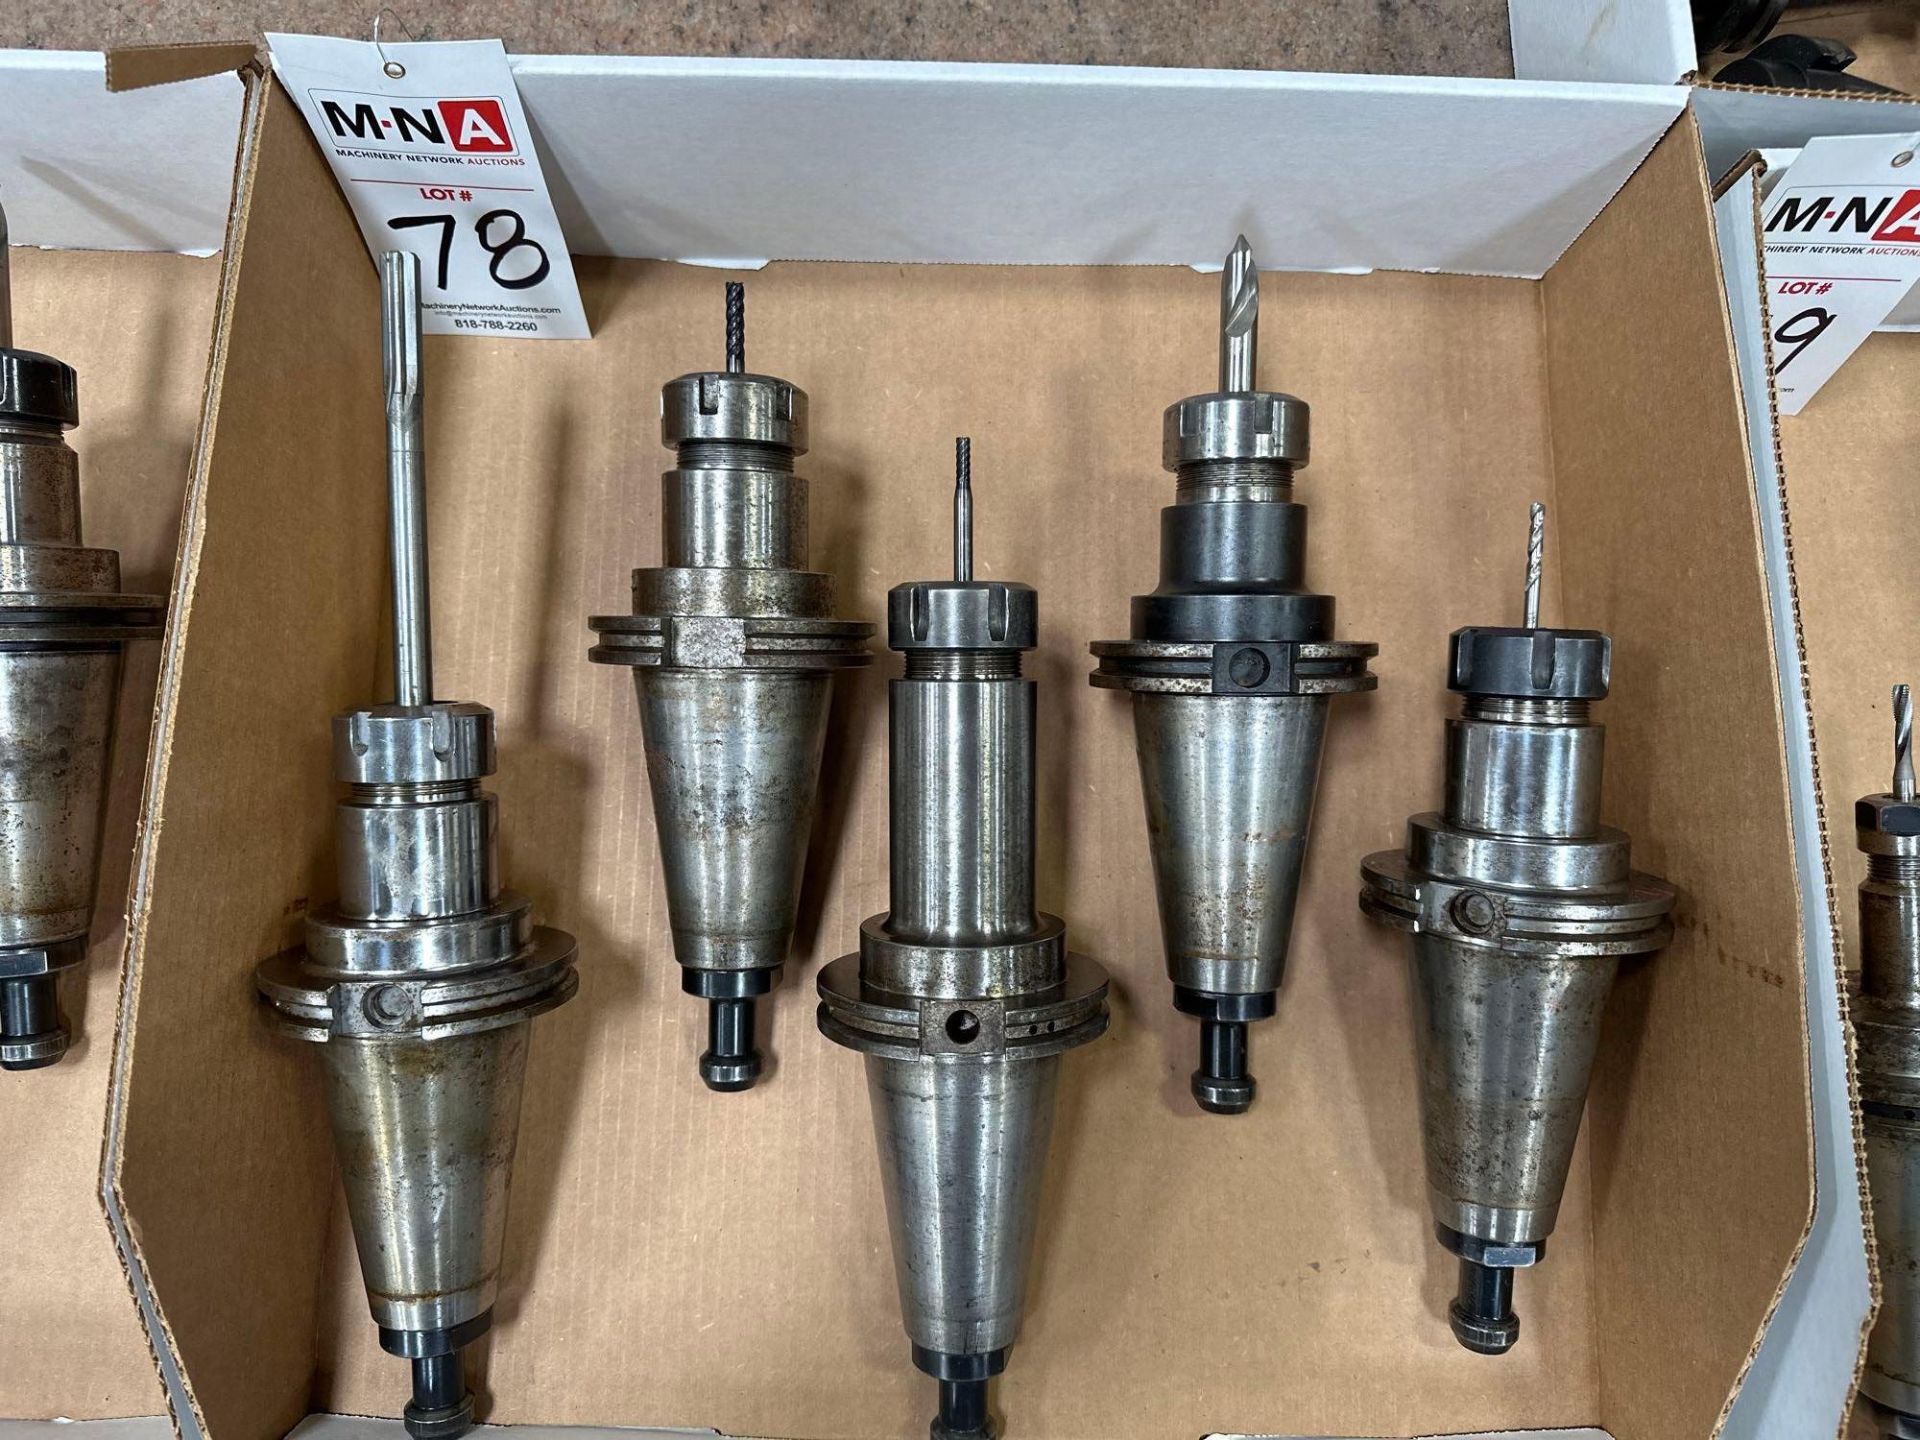 (5) CT-50 Tool Holders w/ E32 Collets & Tooling